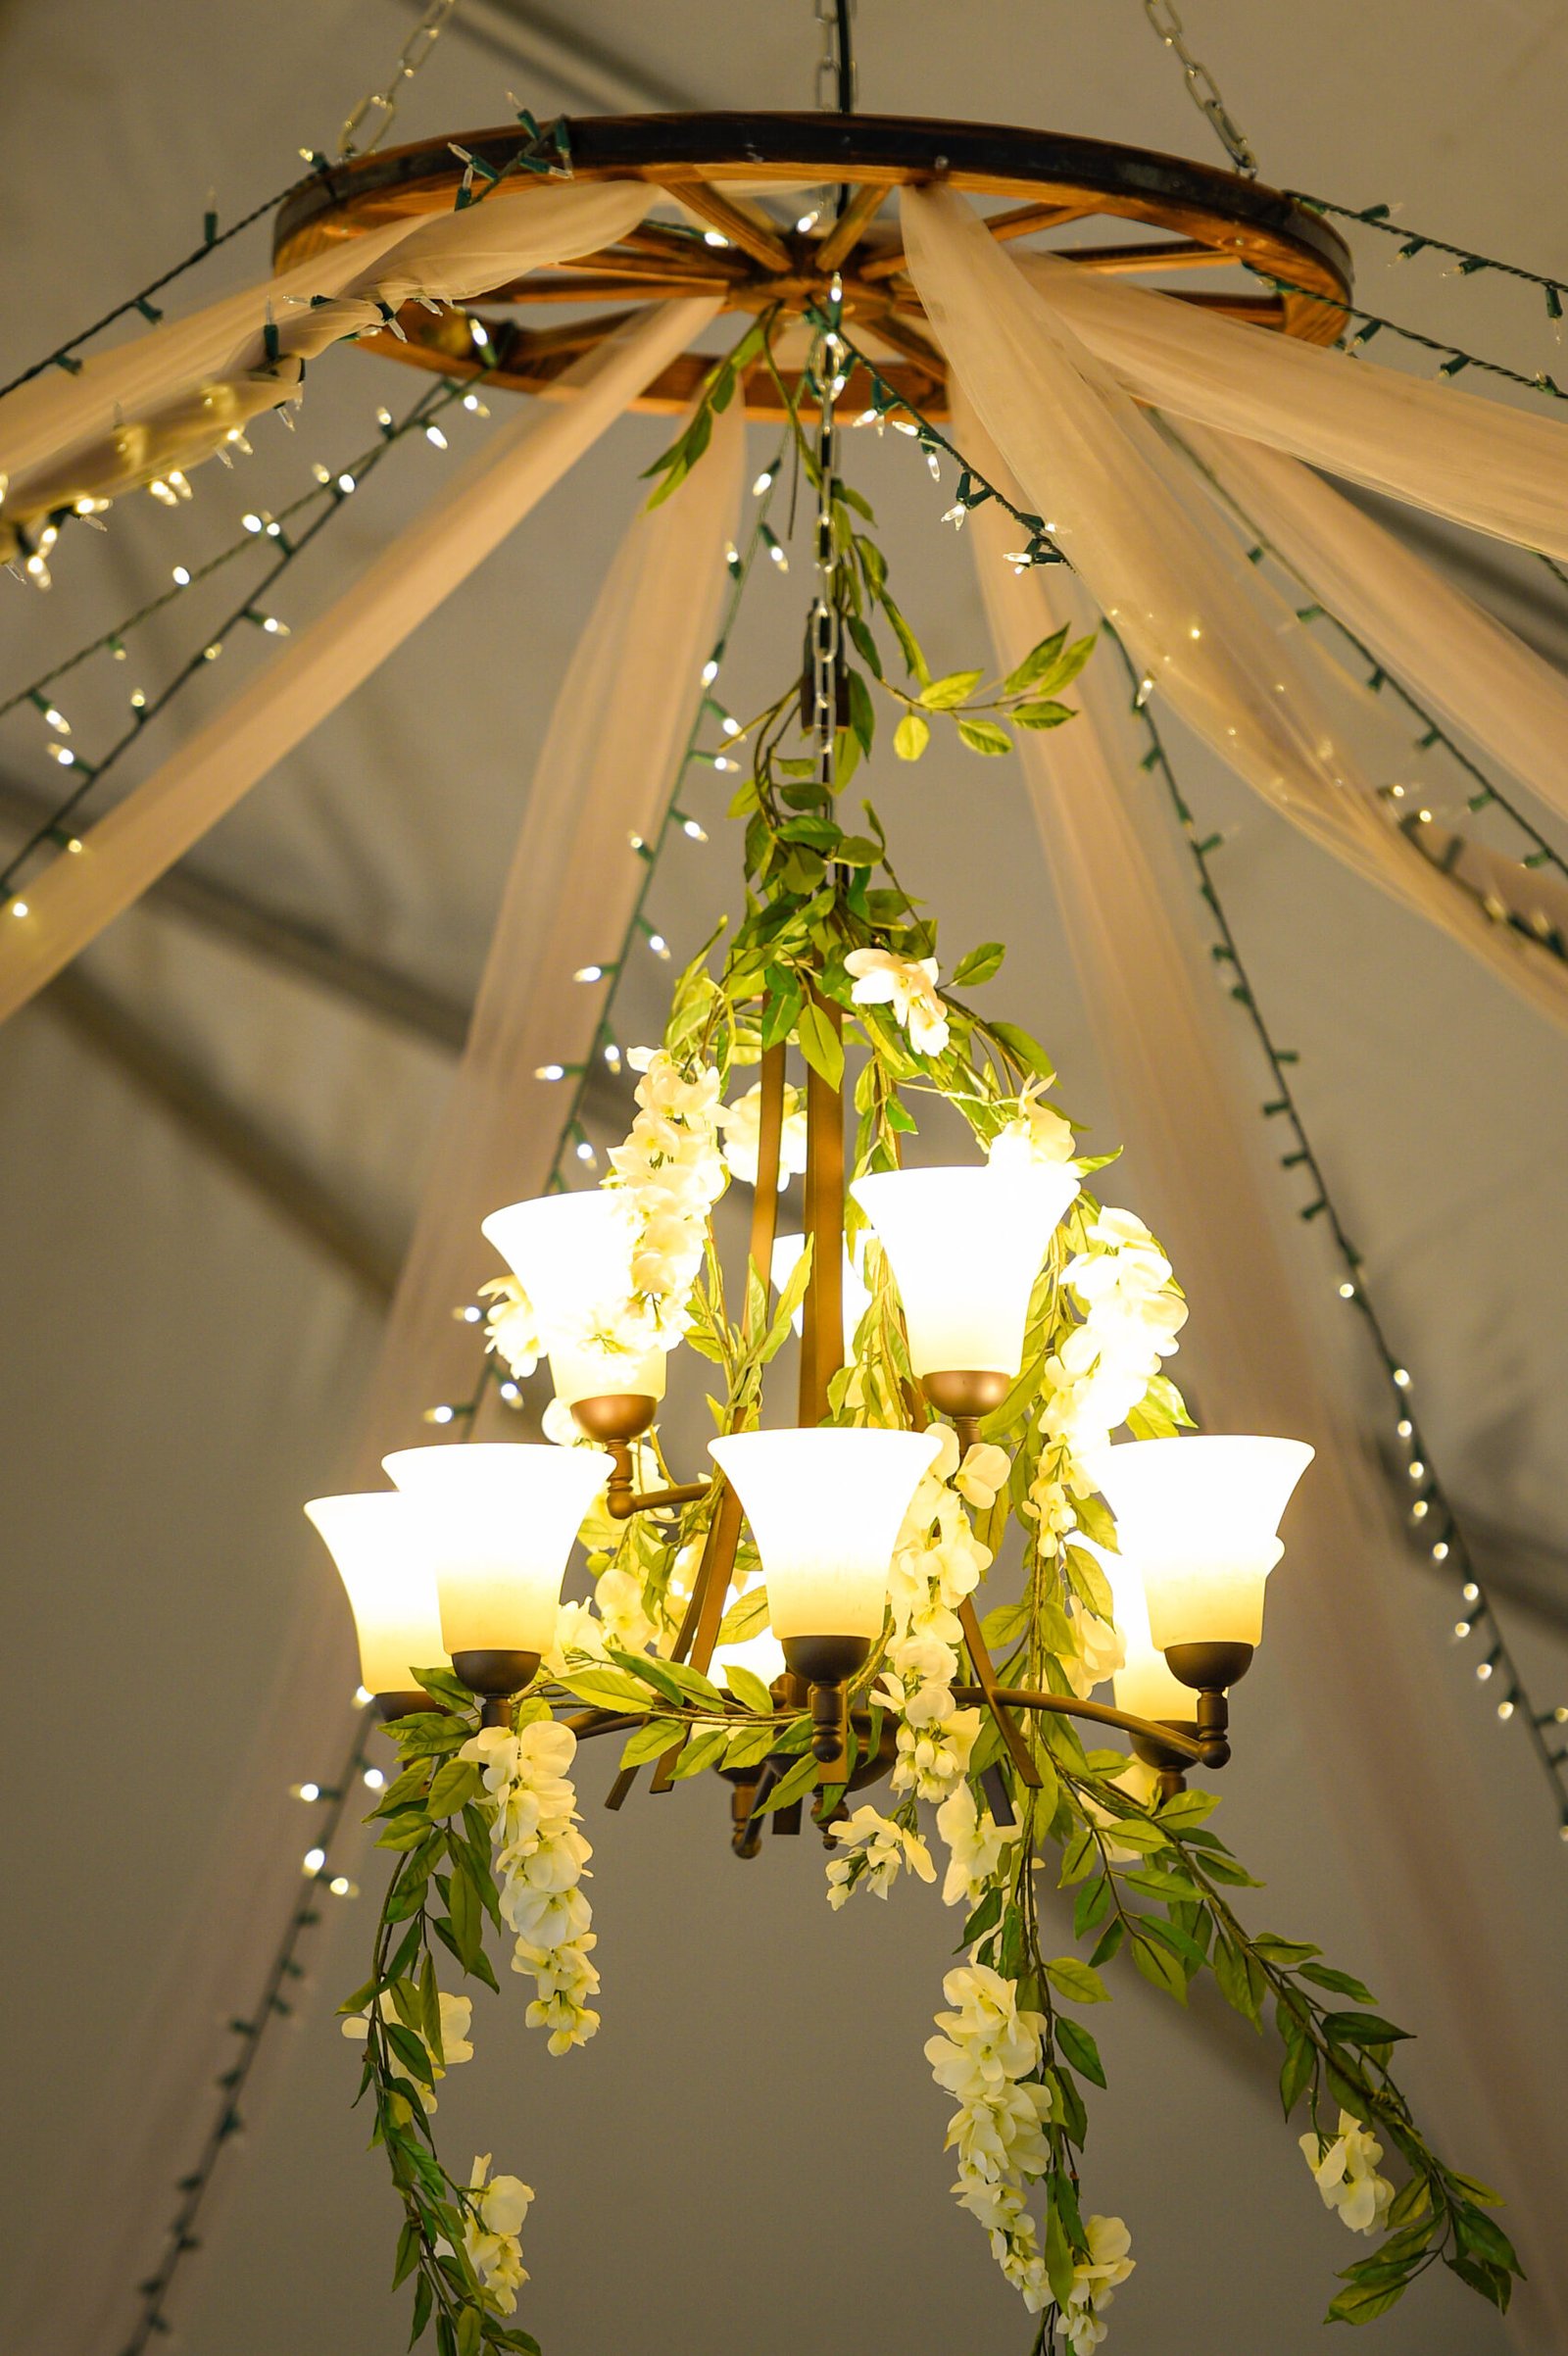 Hanging Chandelier with greenery